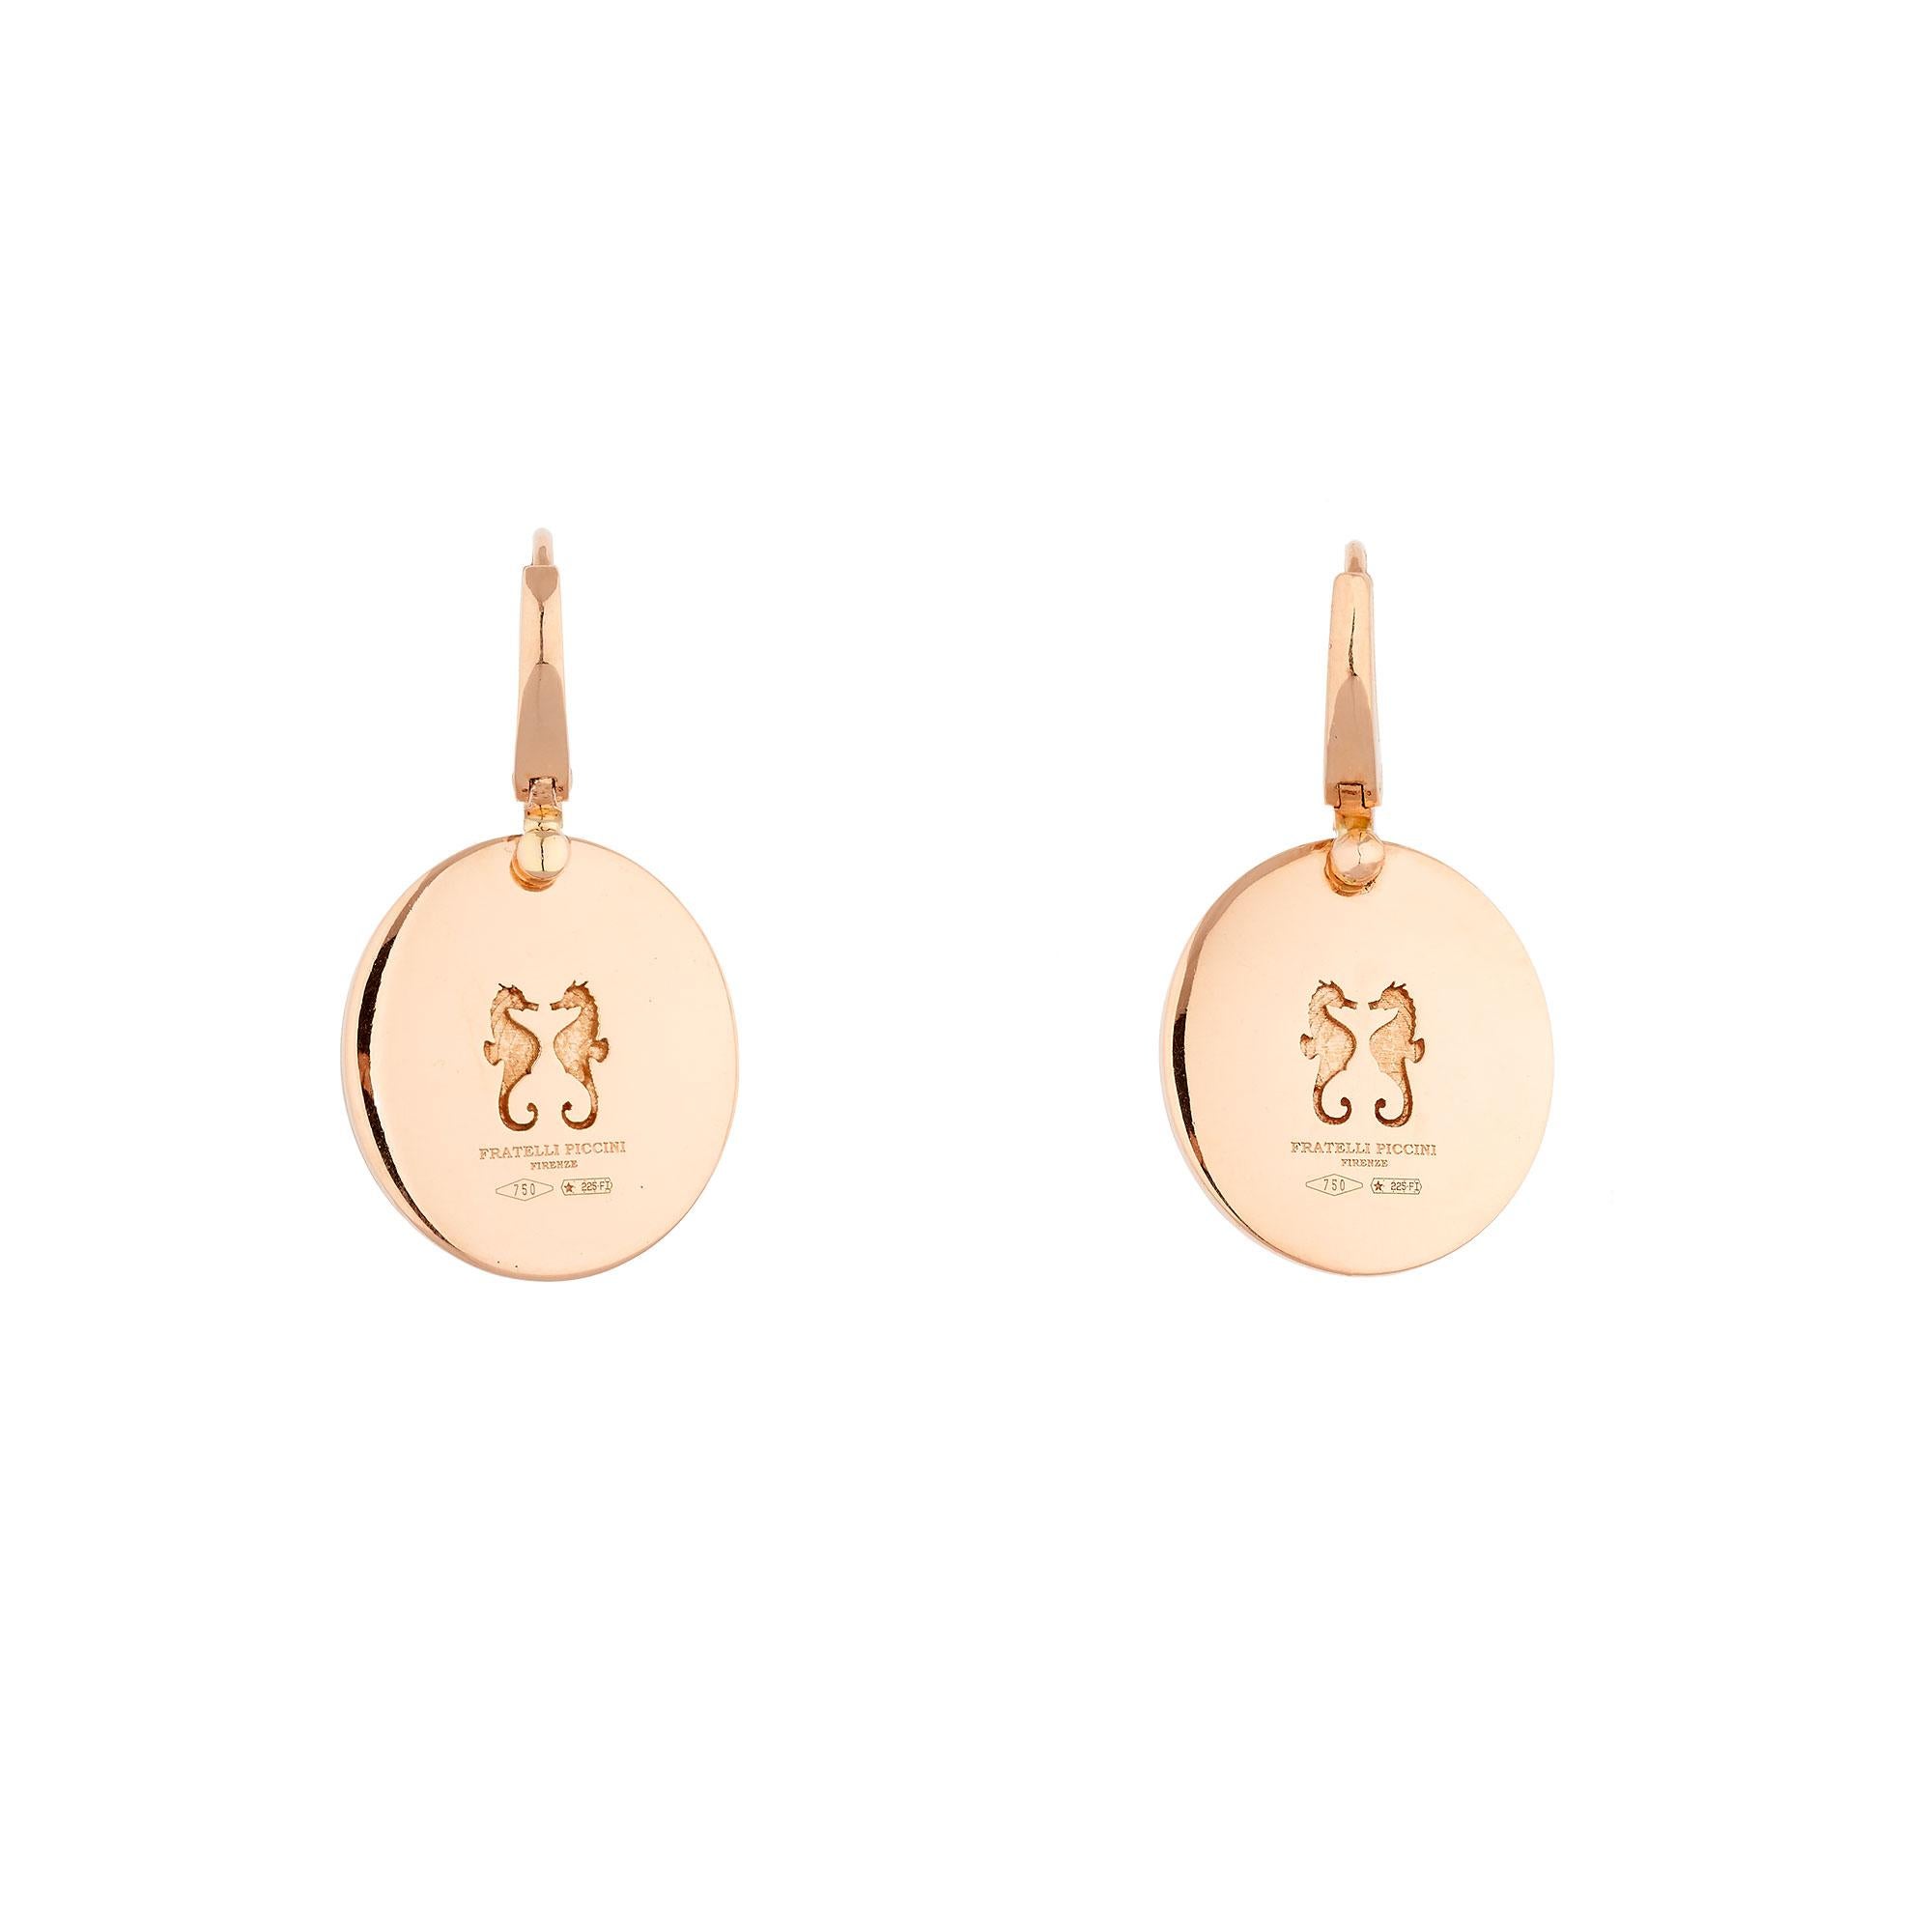 Contemporary 18kt rose gold 11.82ct drop earrings, Brilliant 0.60ct, Agate 5.50, handmade For Sale